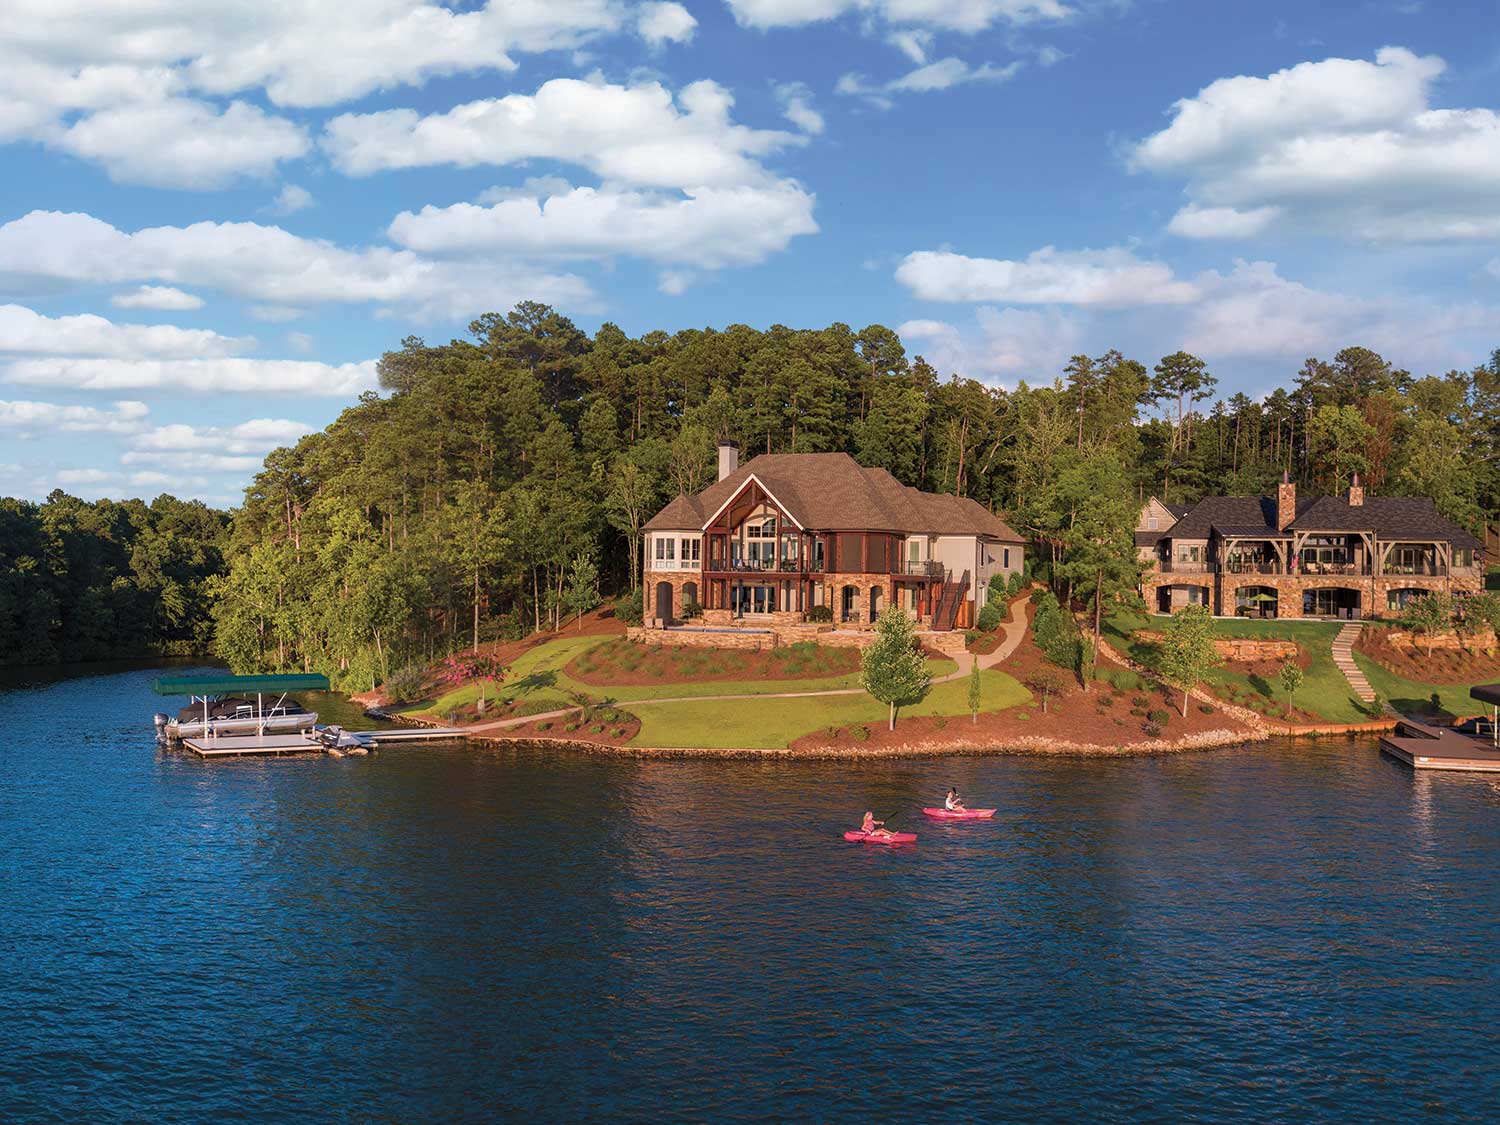 One of the many beautiful homes built by the water of Reynolds Lake Oconee.